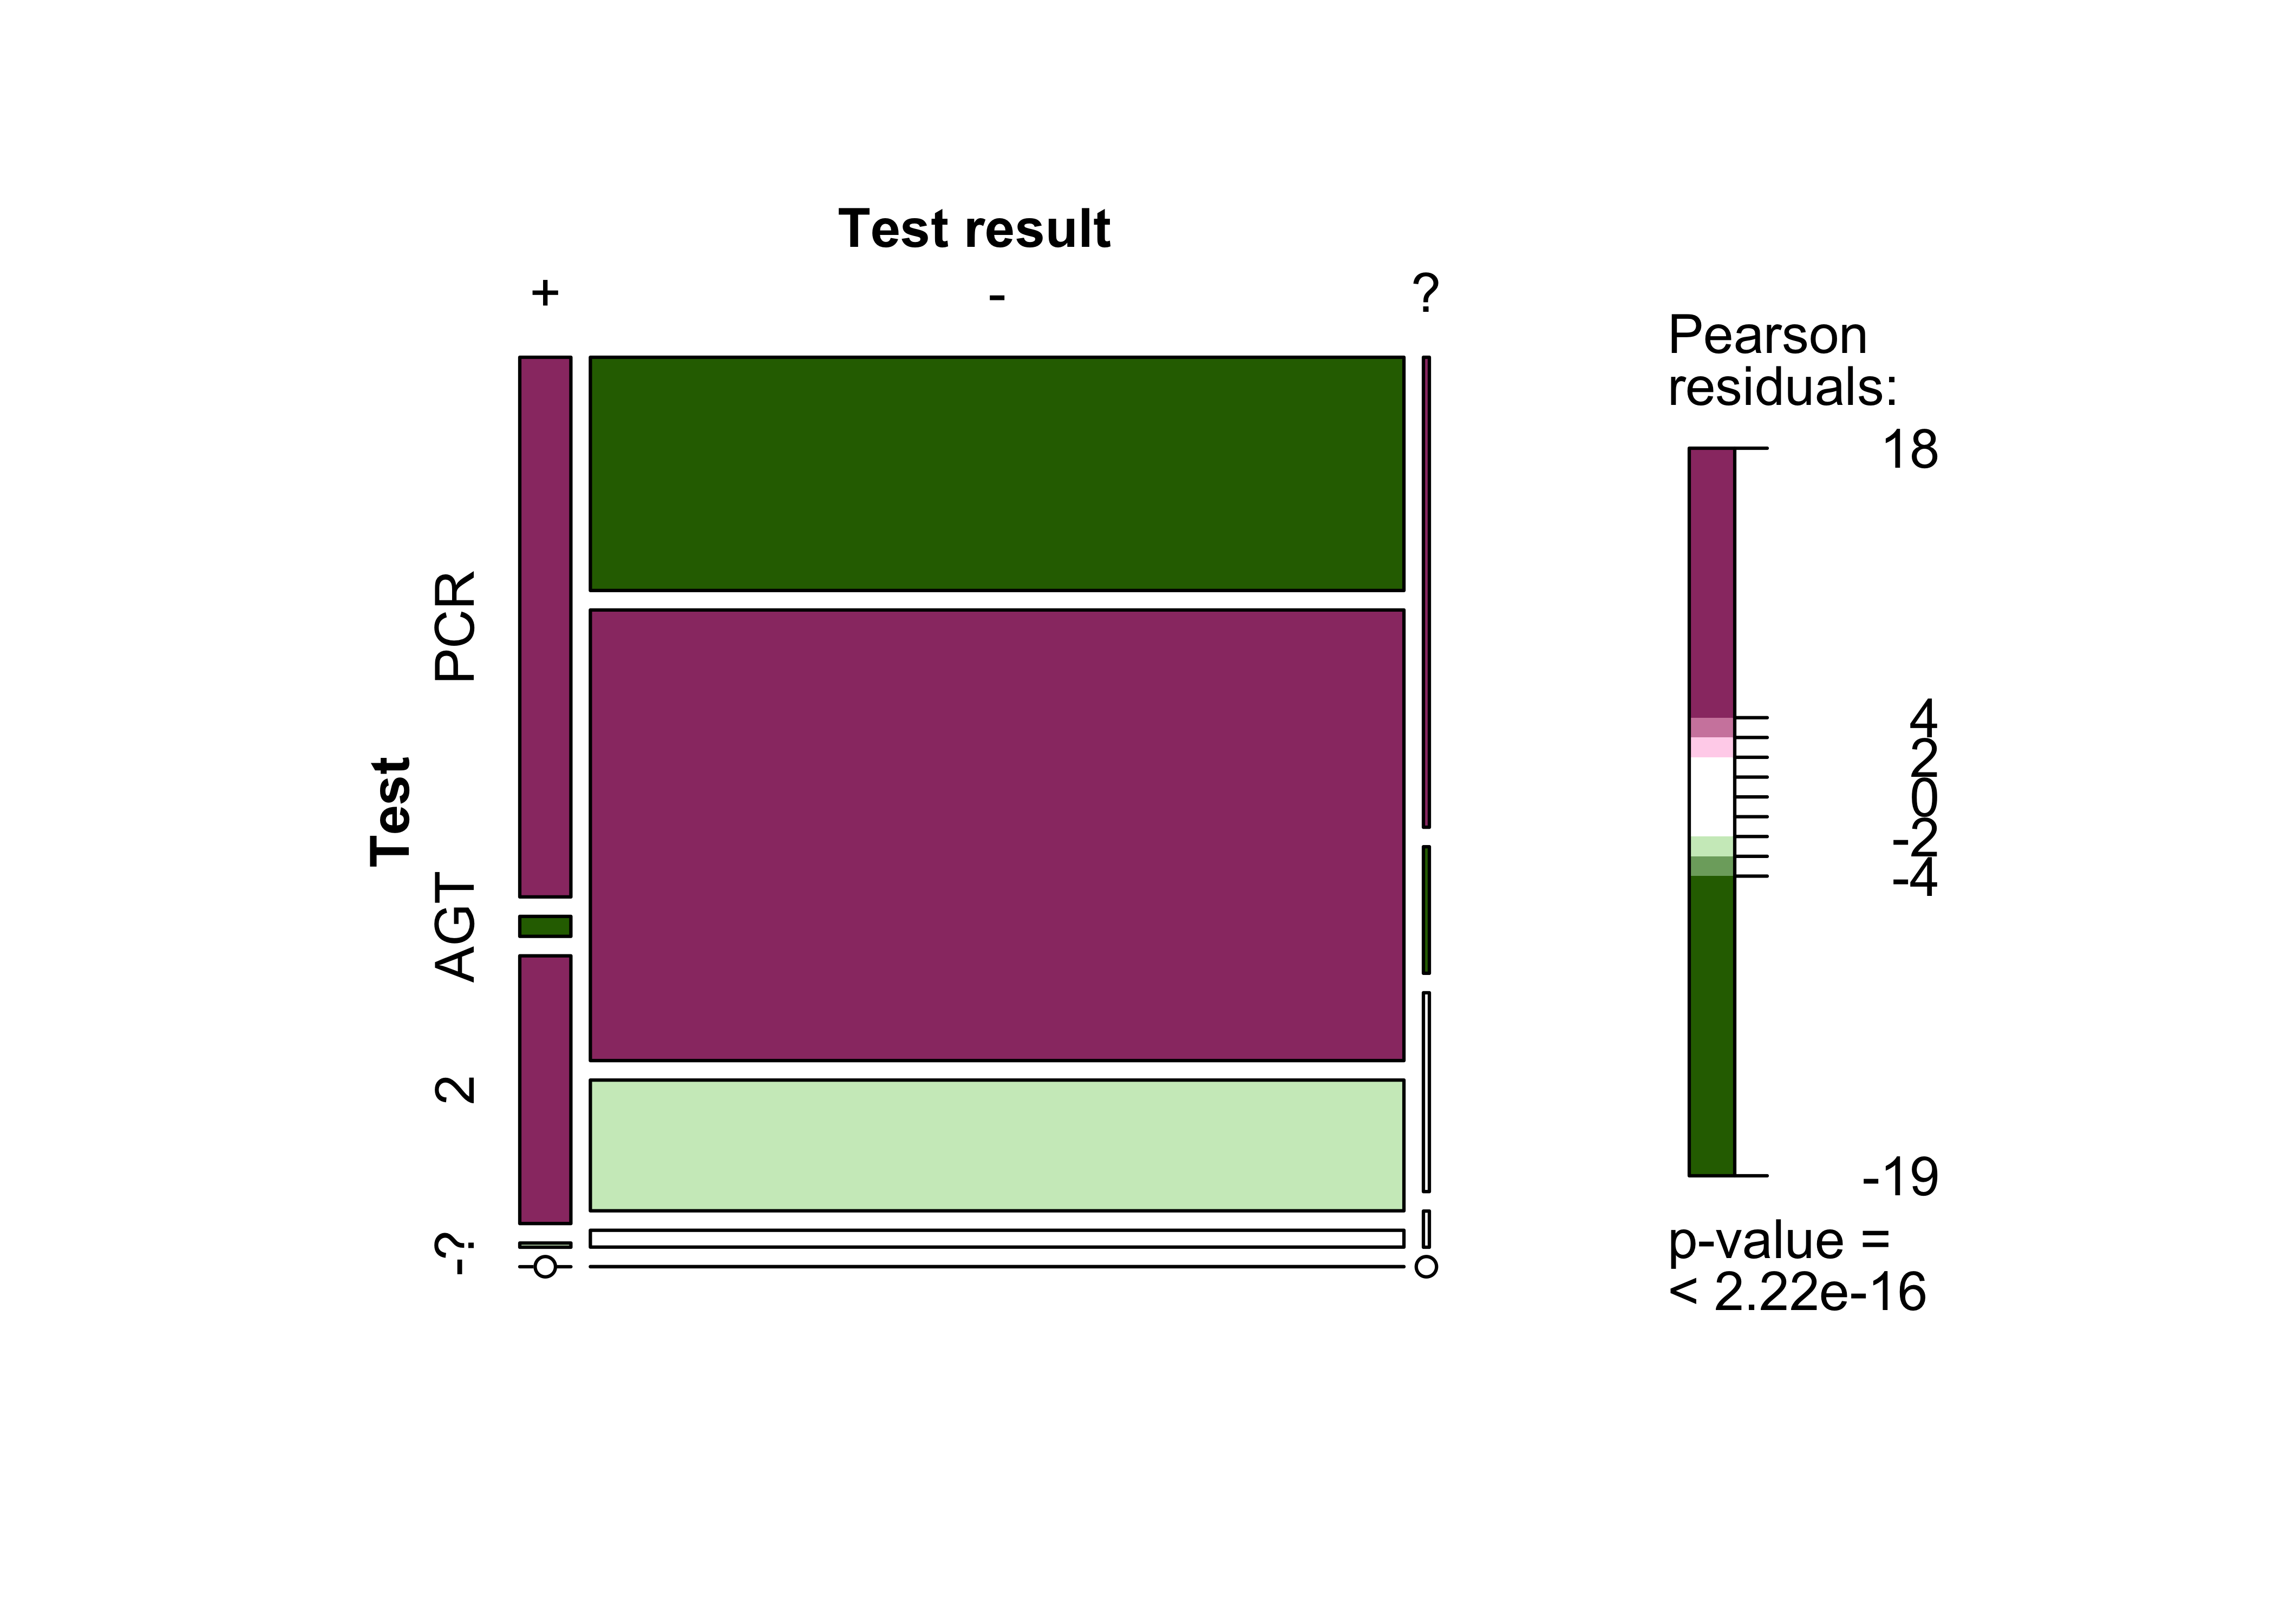 Fig. 11: EDUS – Relationship between tests carried out and test resultss.